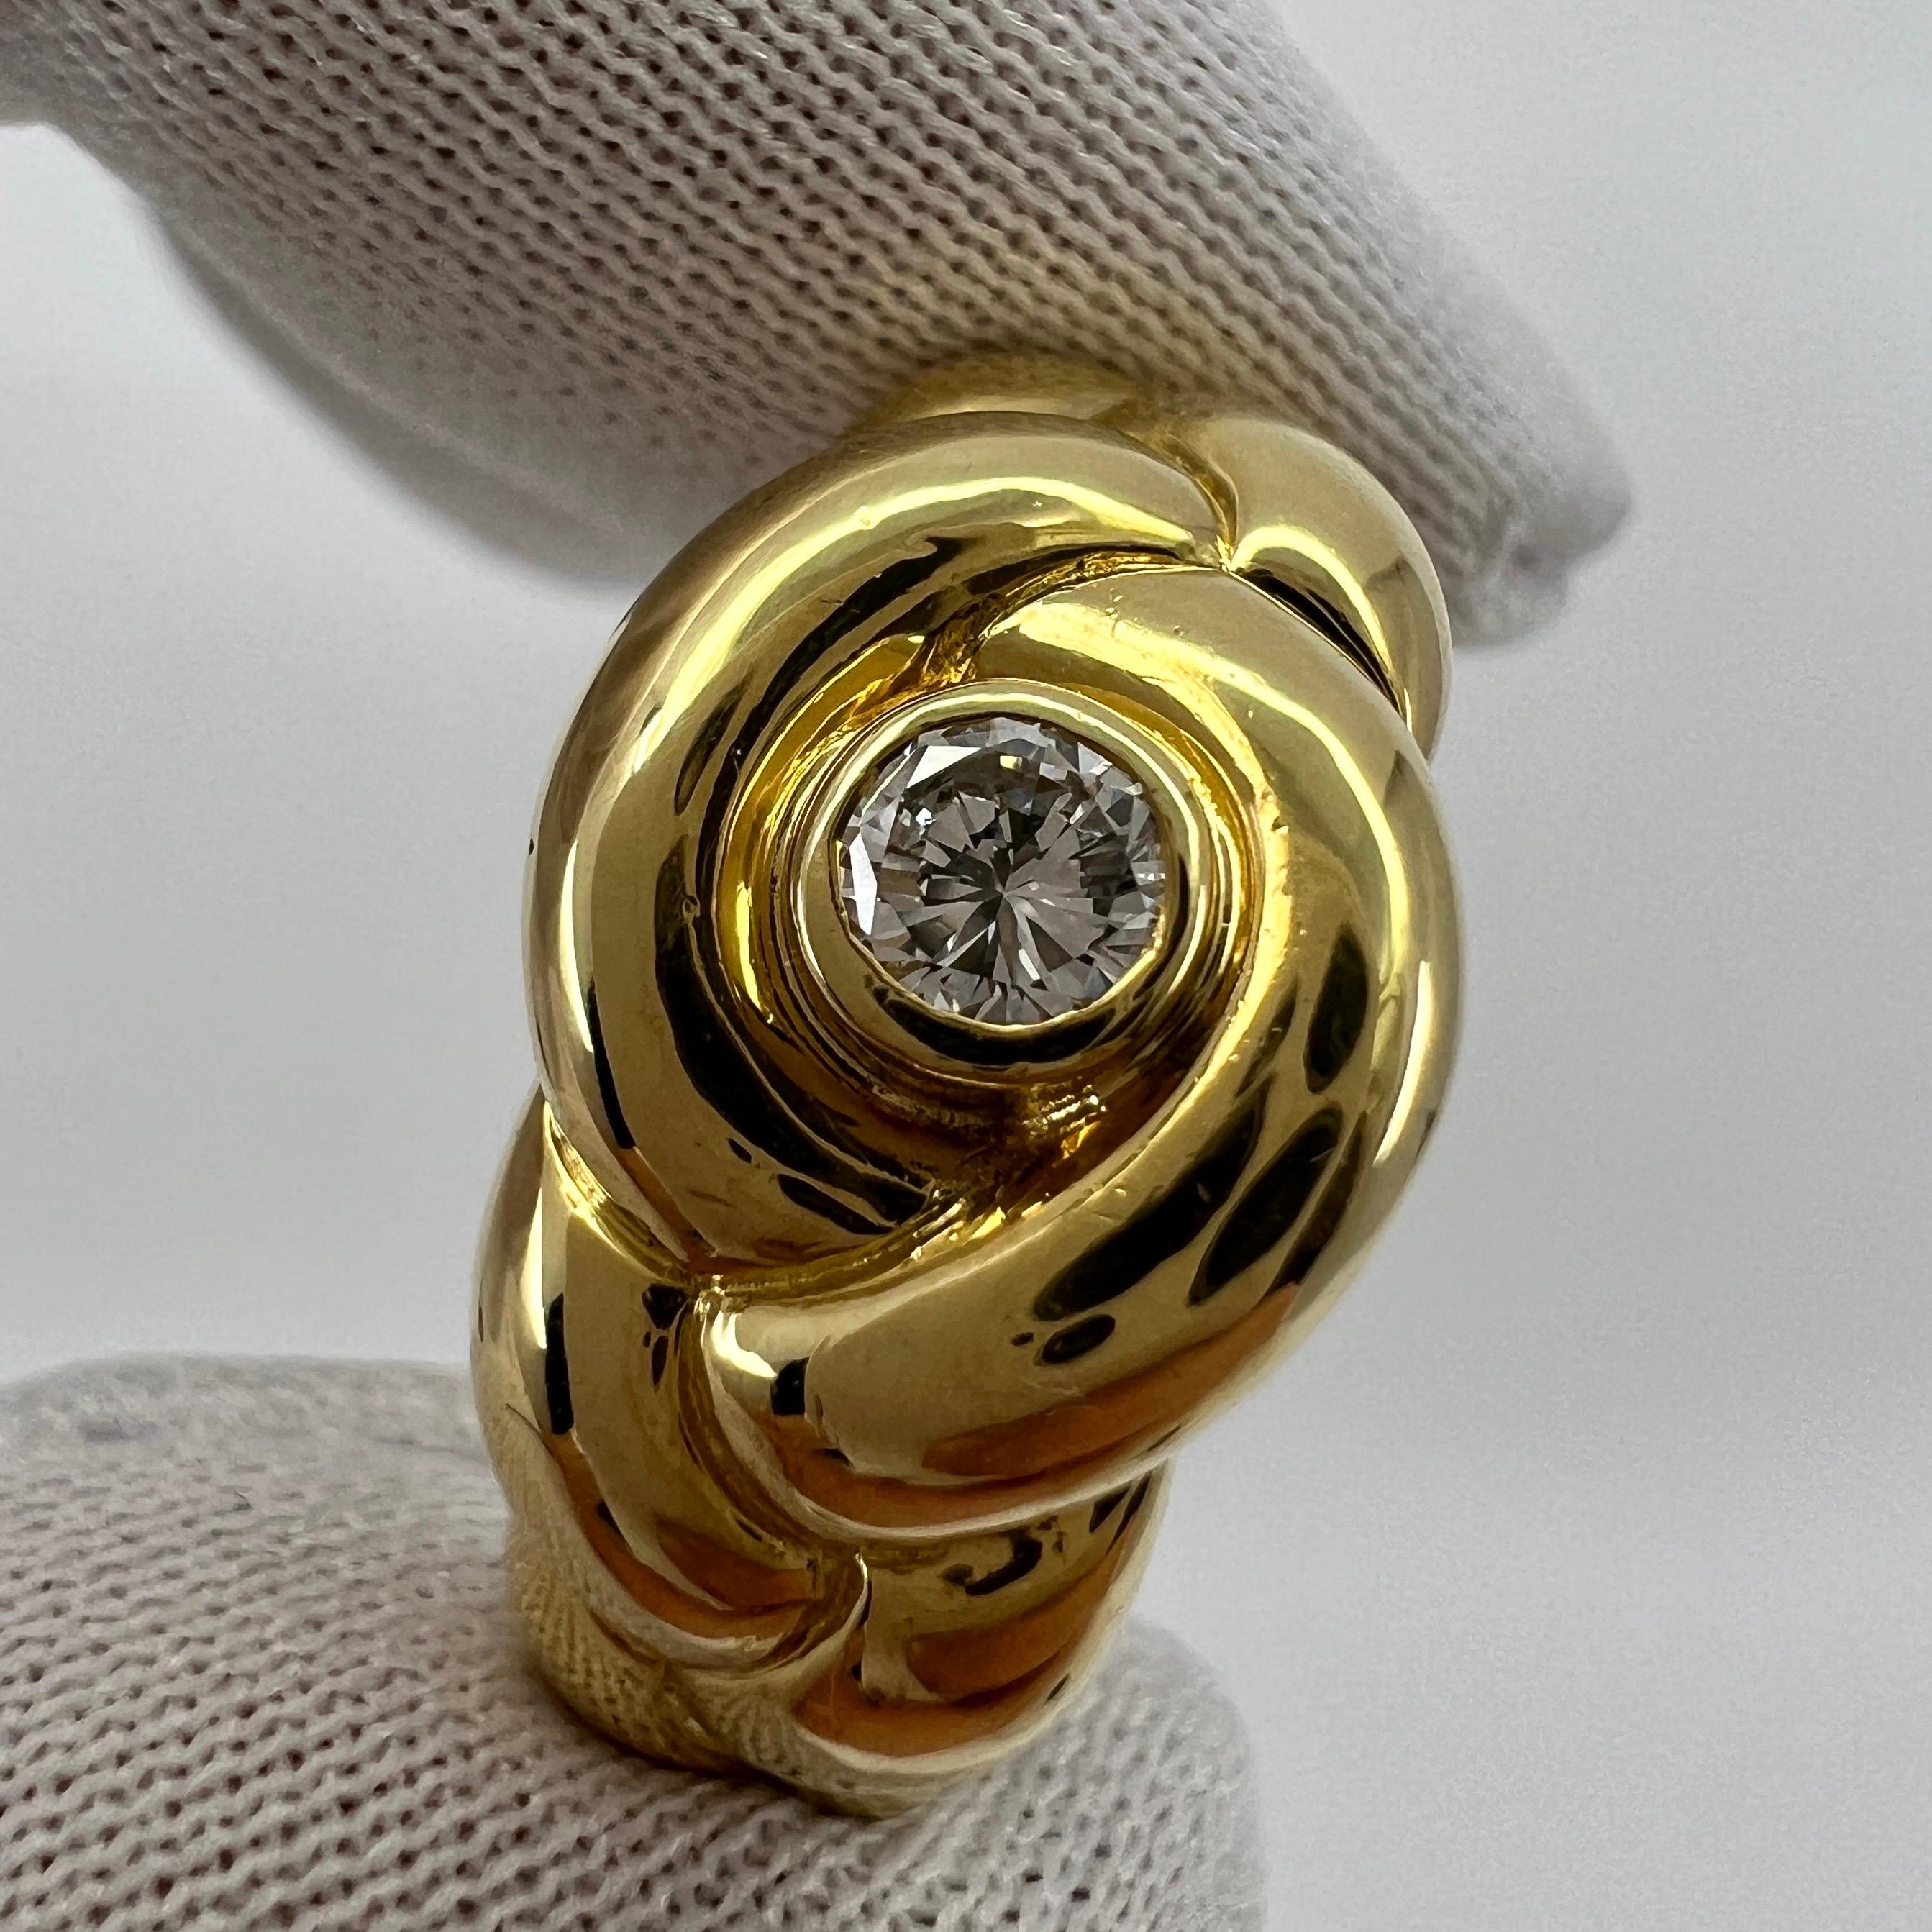 Rare Vintage Van Cleef & Arpels Diamond 18k Yellow Gold Braid Rope Ring with Box For Sale 5